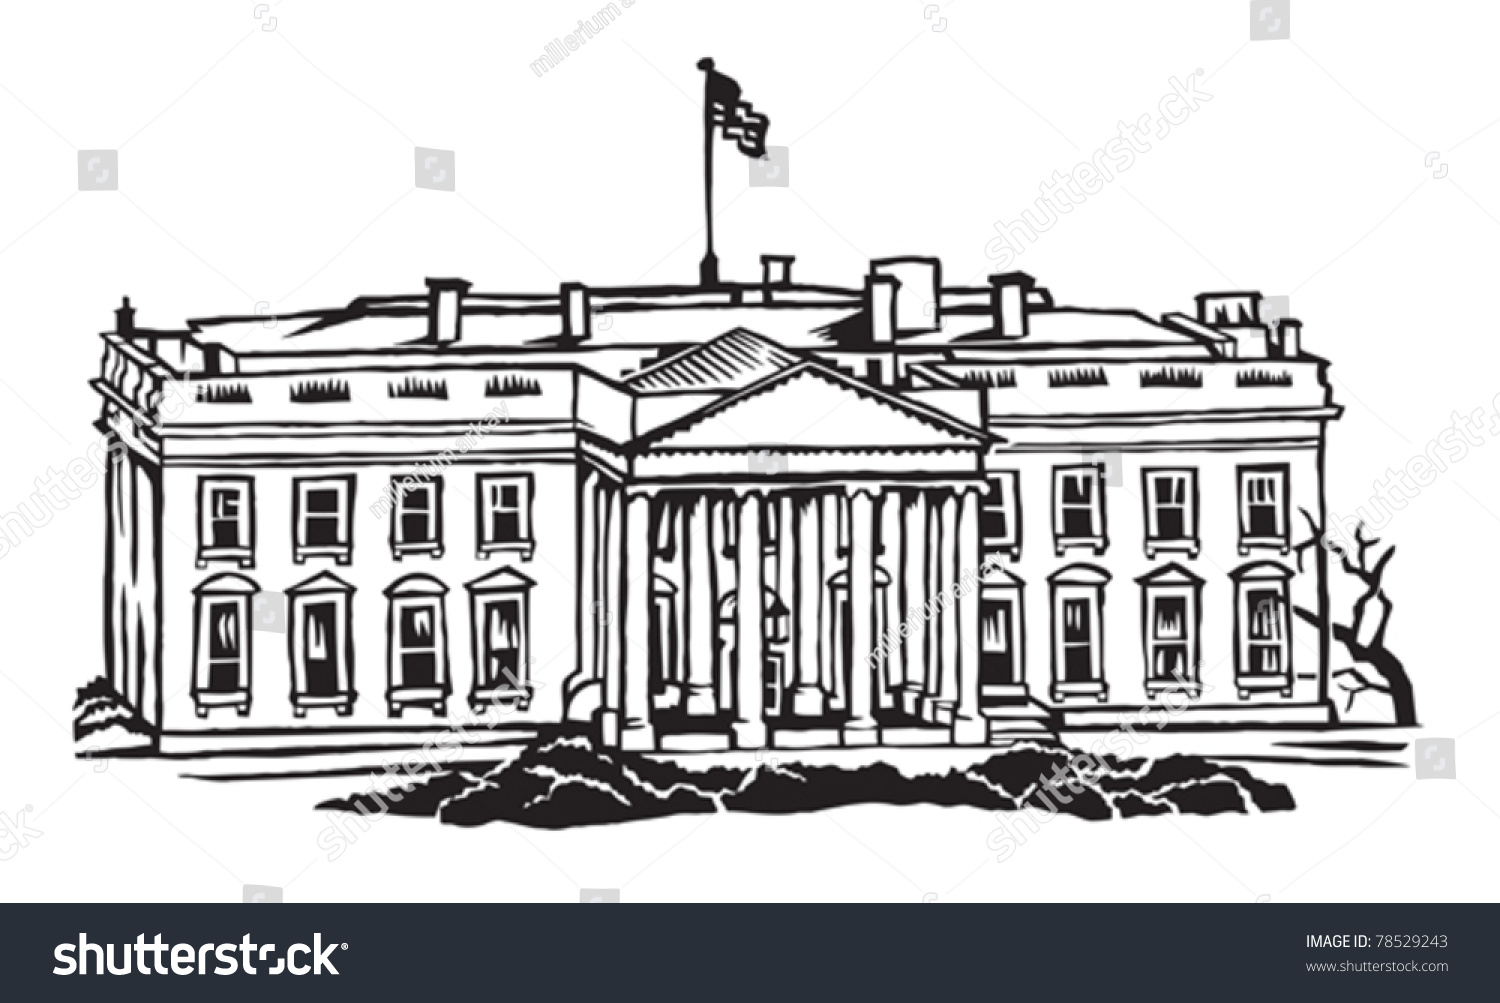 The White House Official Residence Of The President Of The United ...